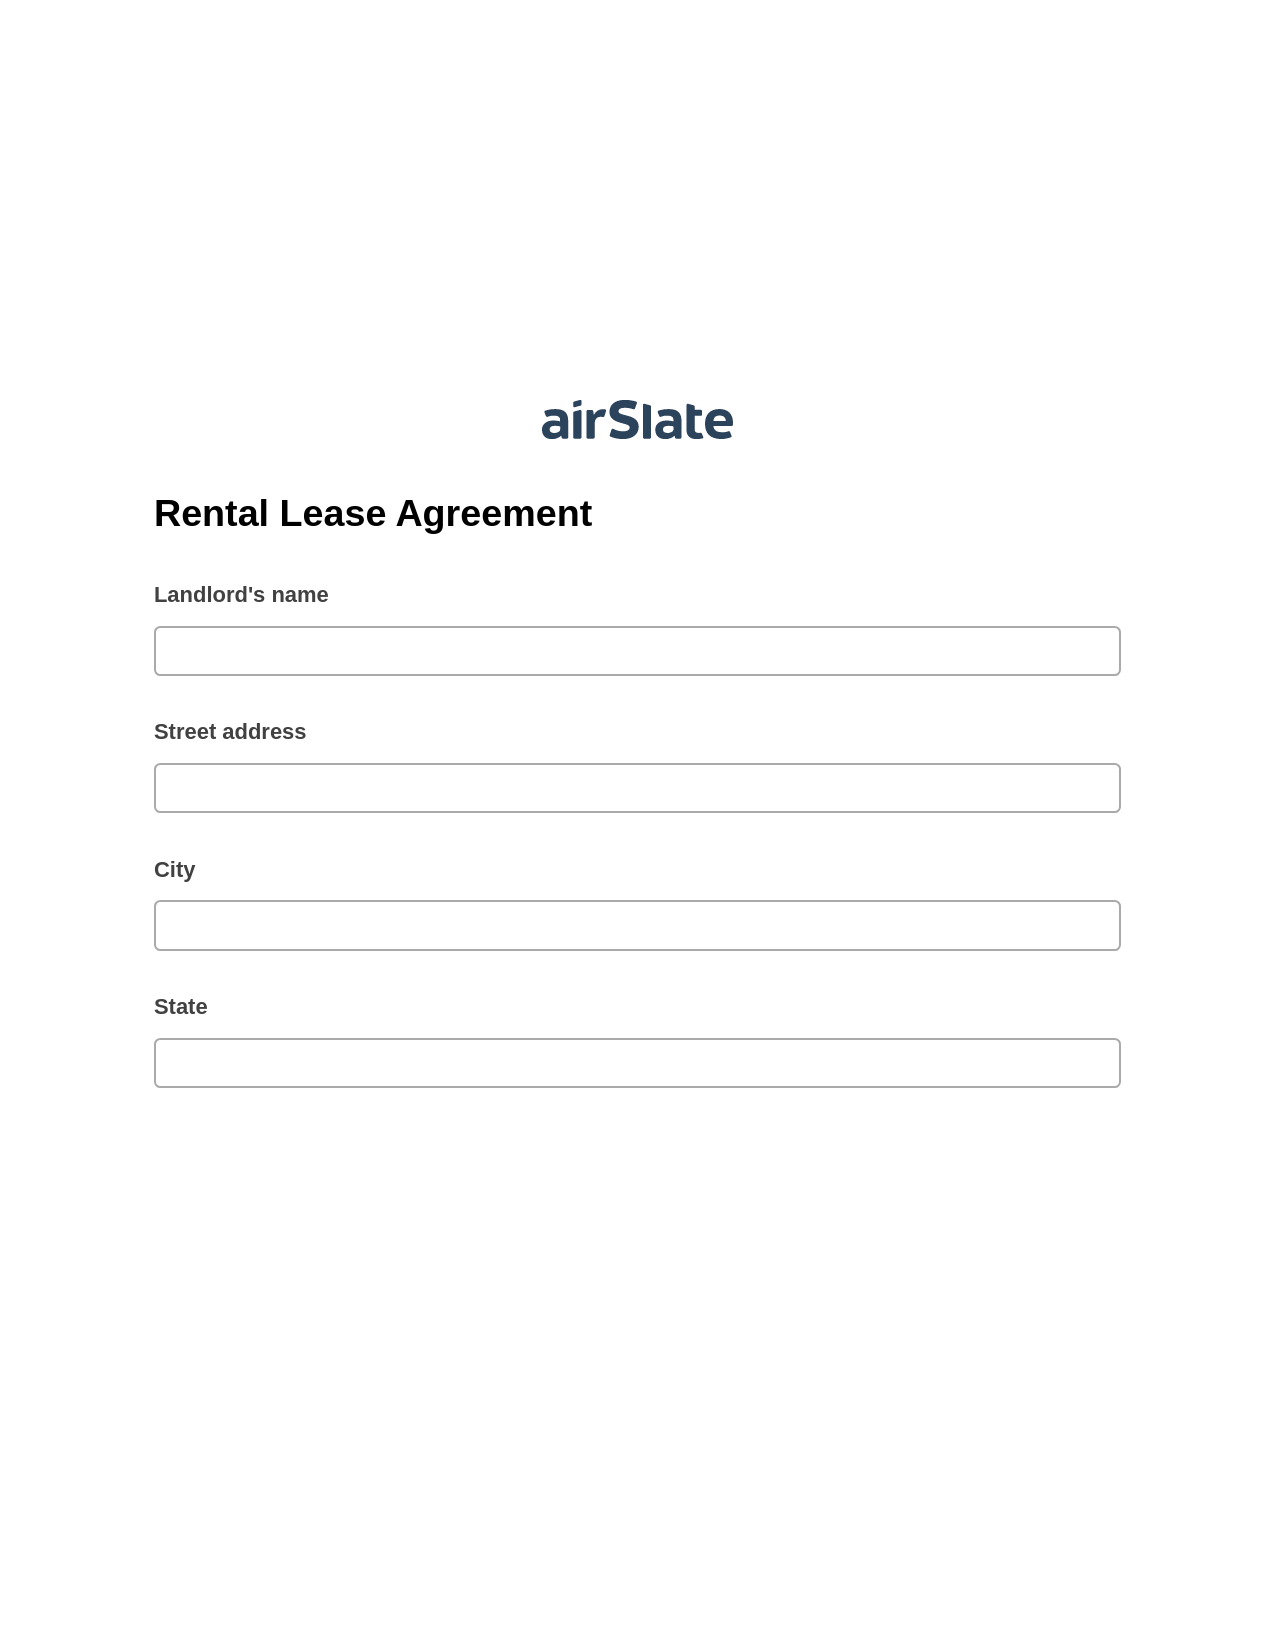 Rental Lease Agreement Pre-fill from CSV File Bot, Create NetSuite Records Bot, Export to Smartsheet